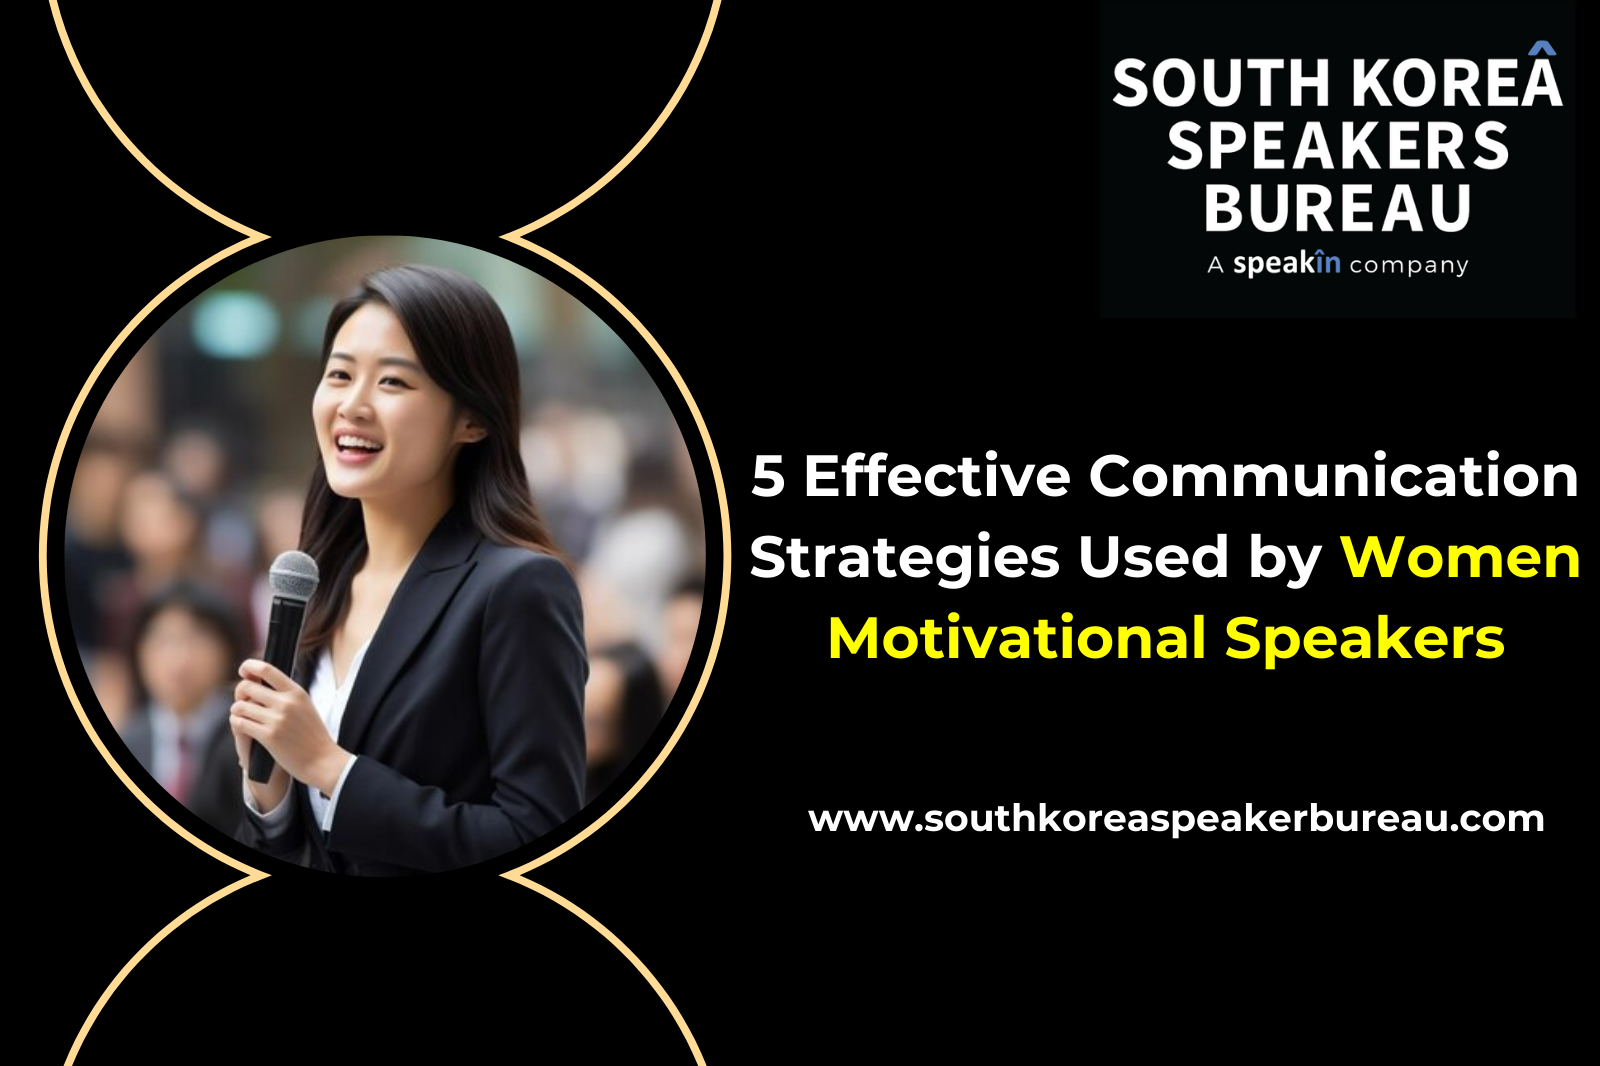 5 Effective Communication Strategies Used by Women Motivational Speakers